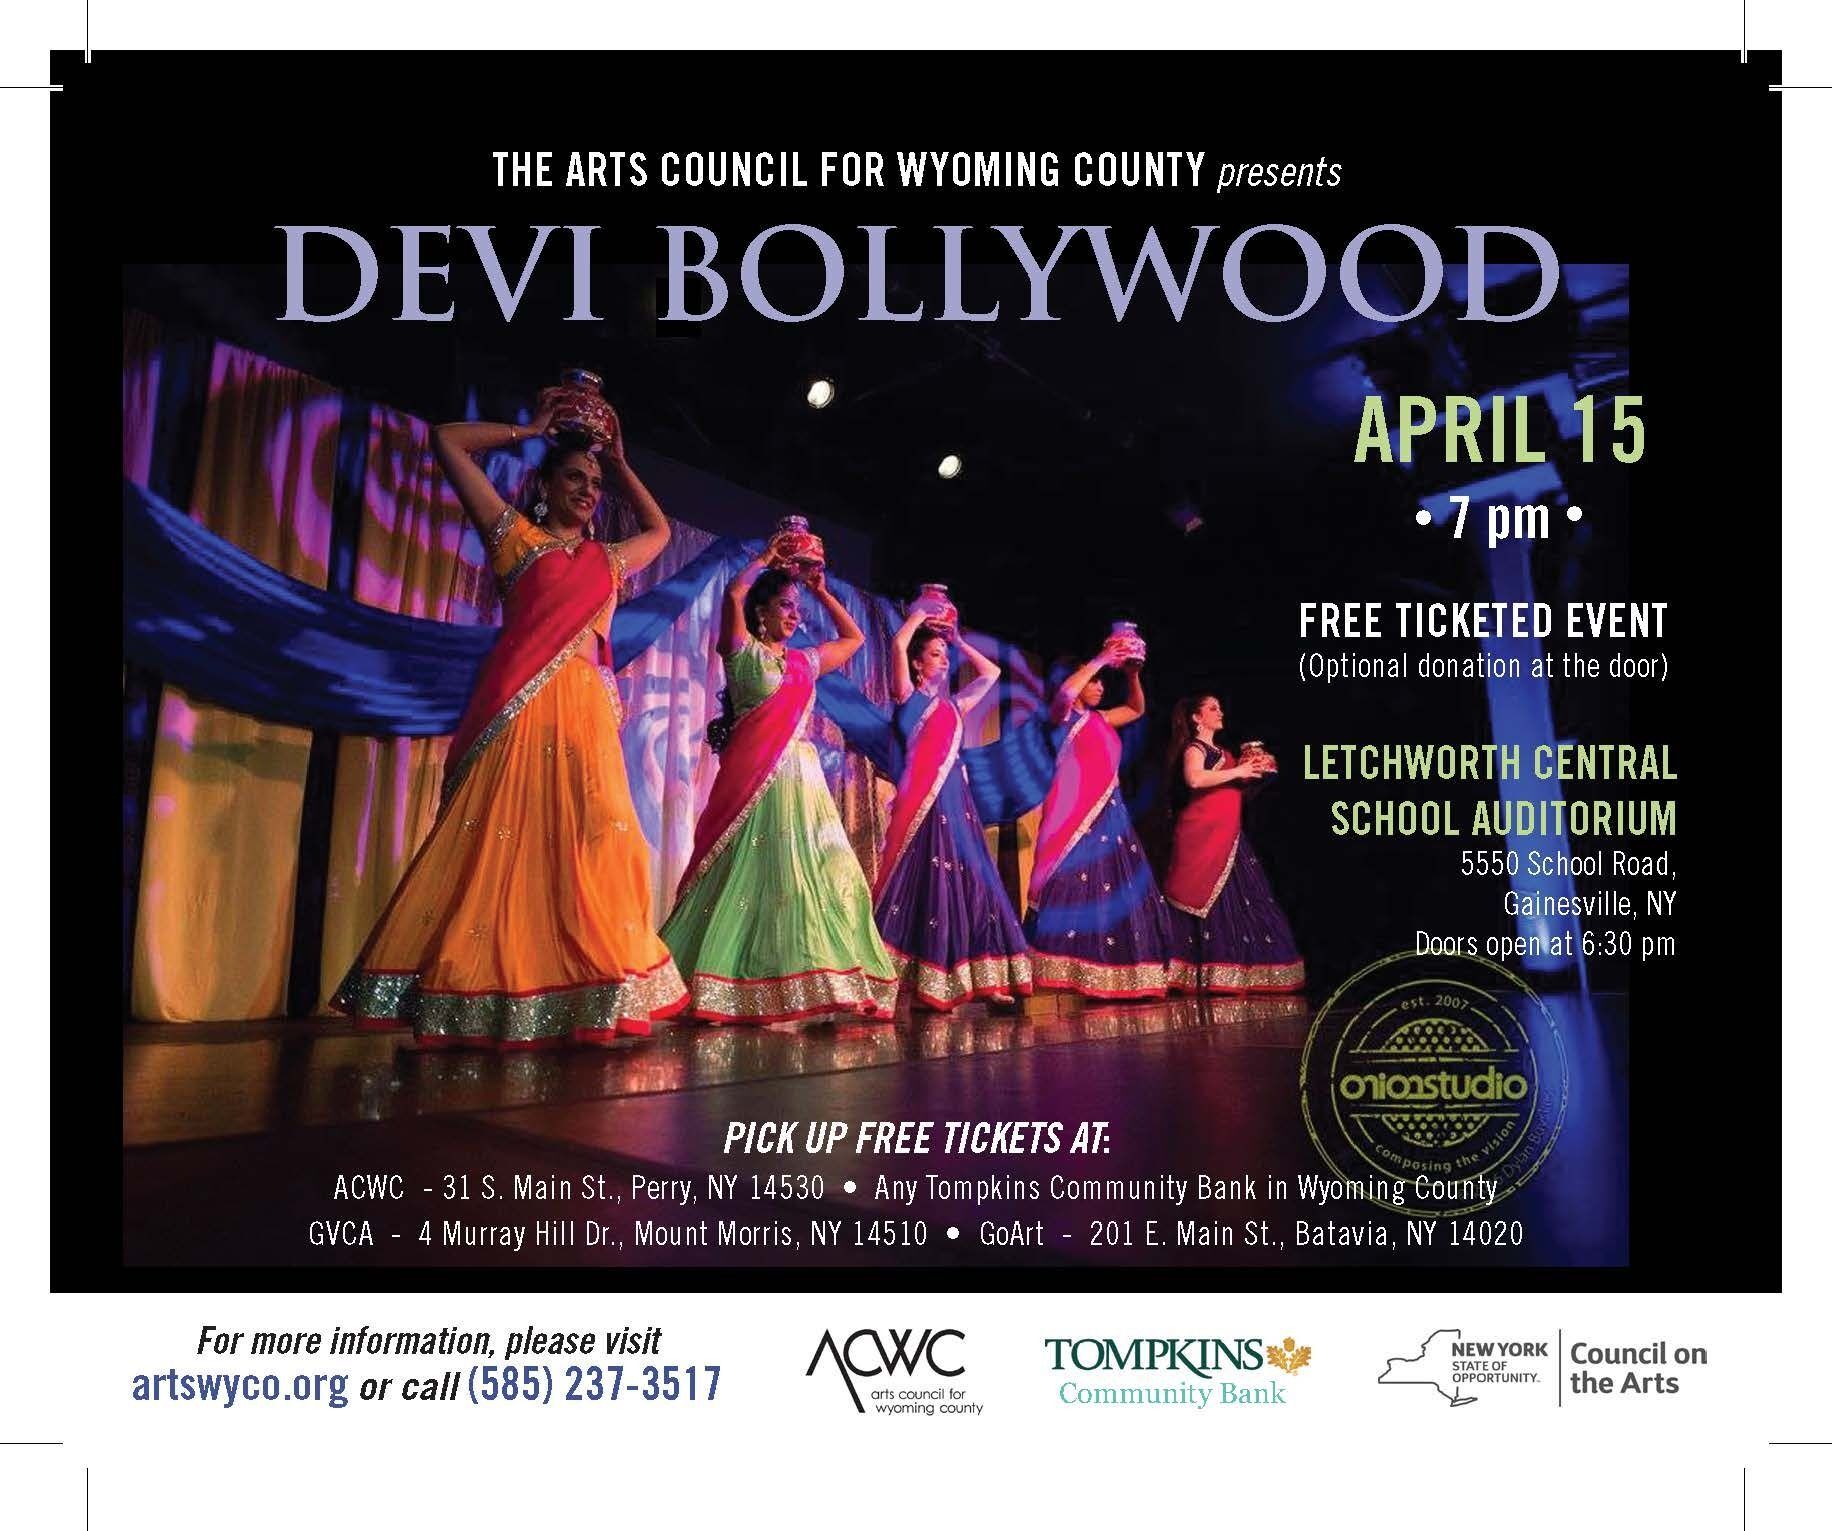 Devi Bollywood comes to Wyoming County